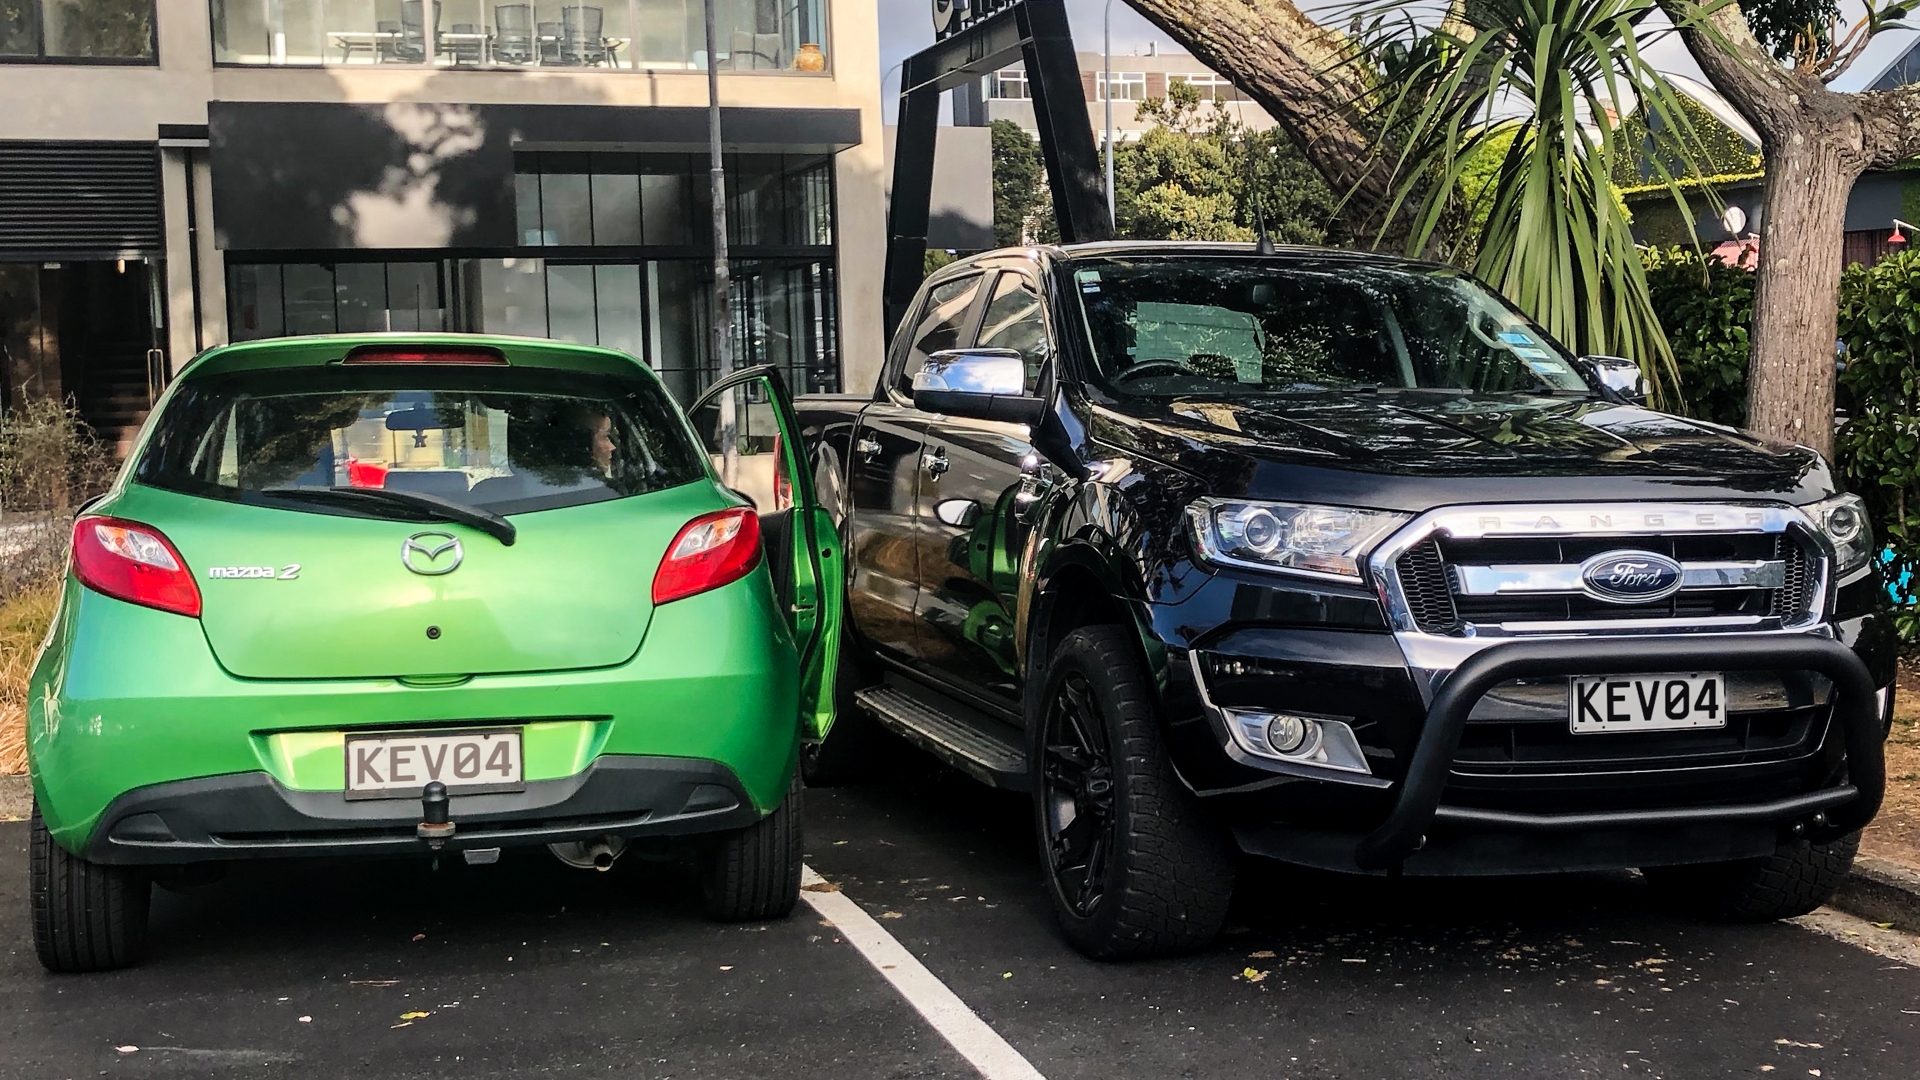 Little green car parked next to large vehicle